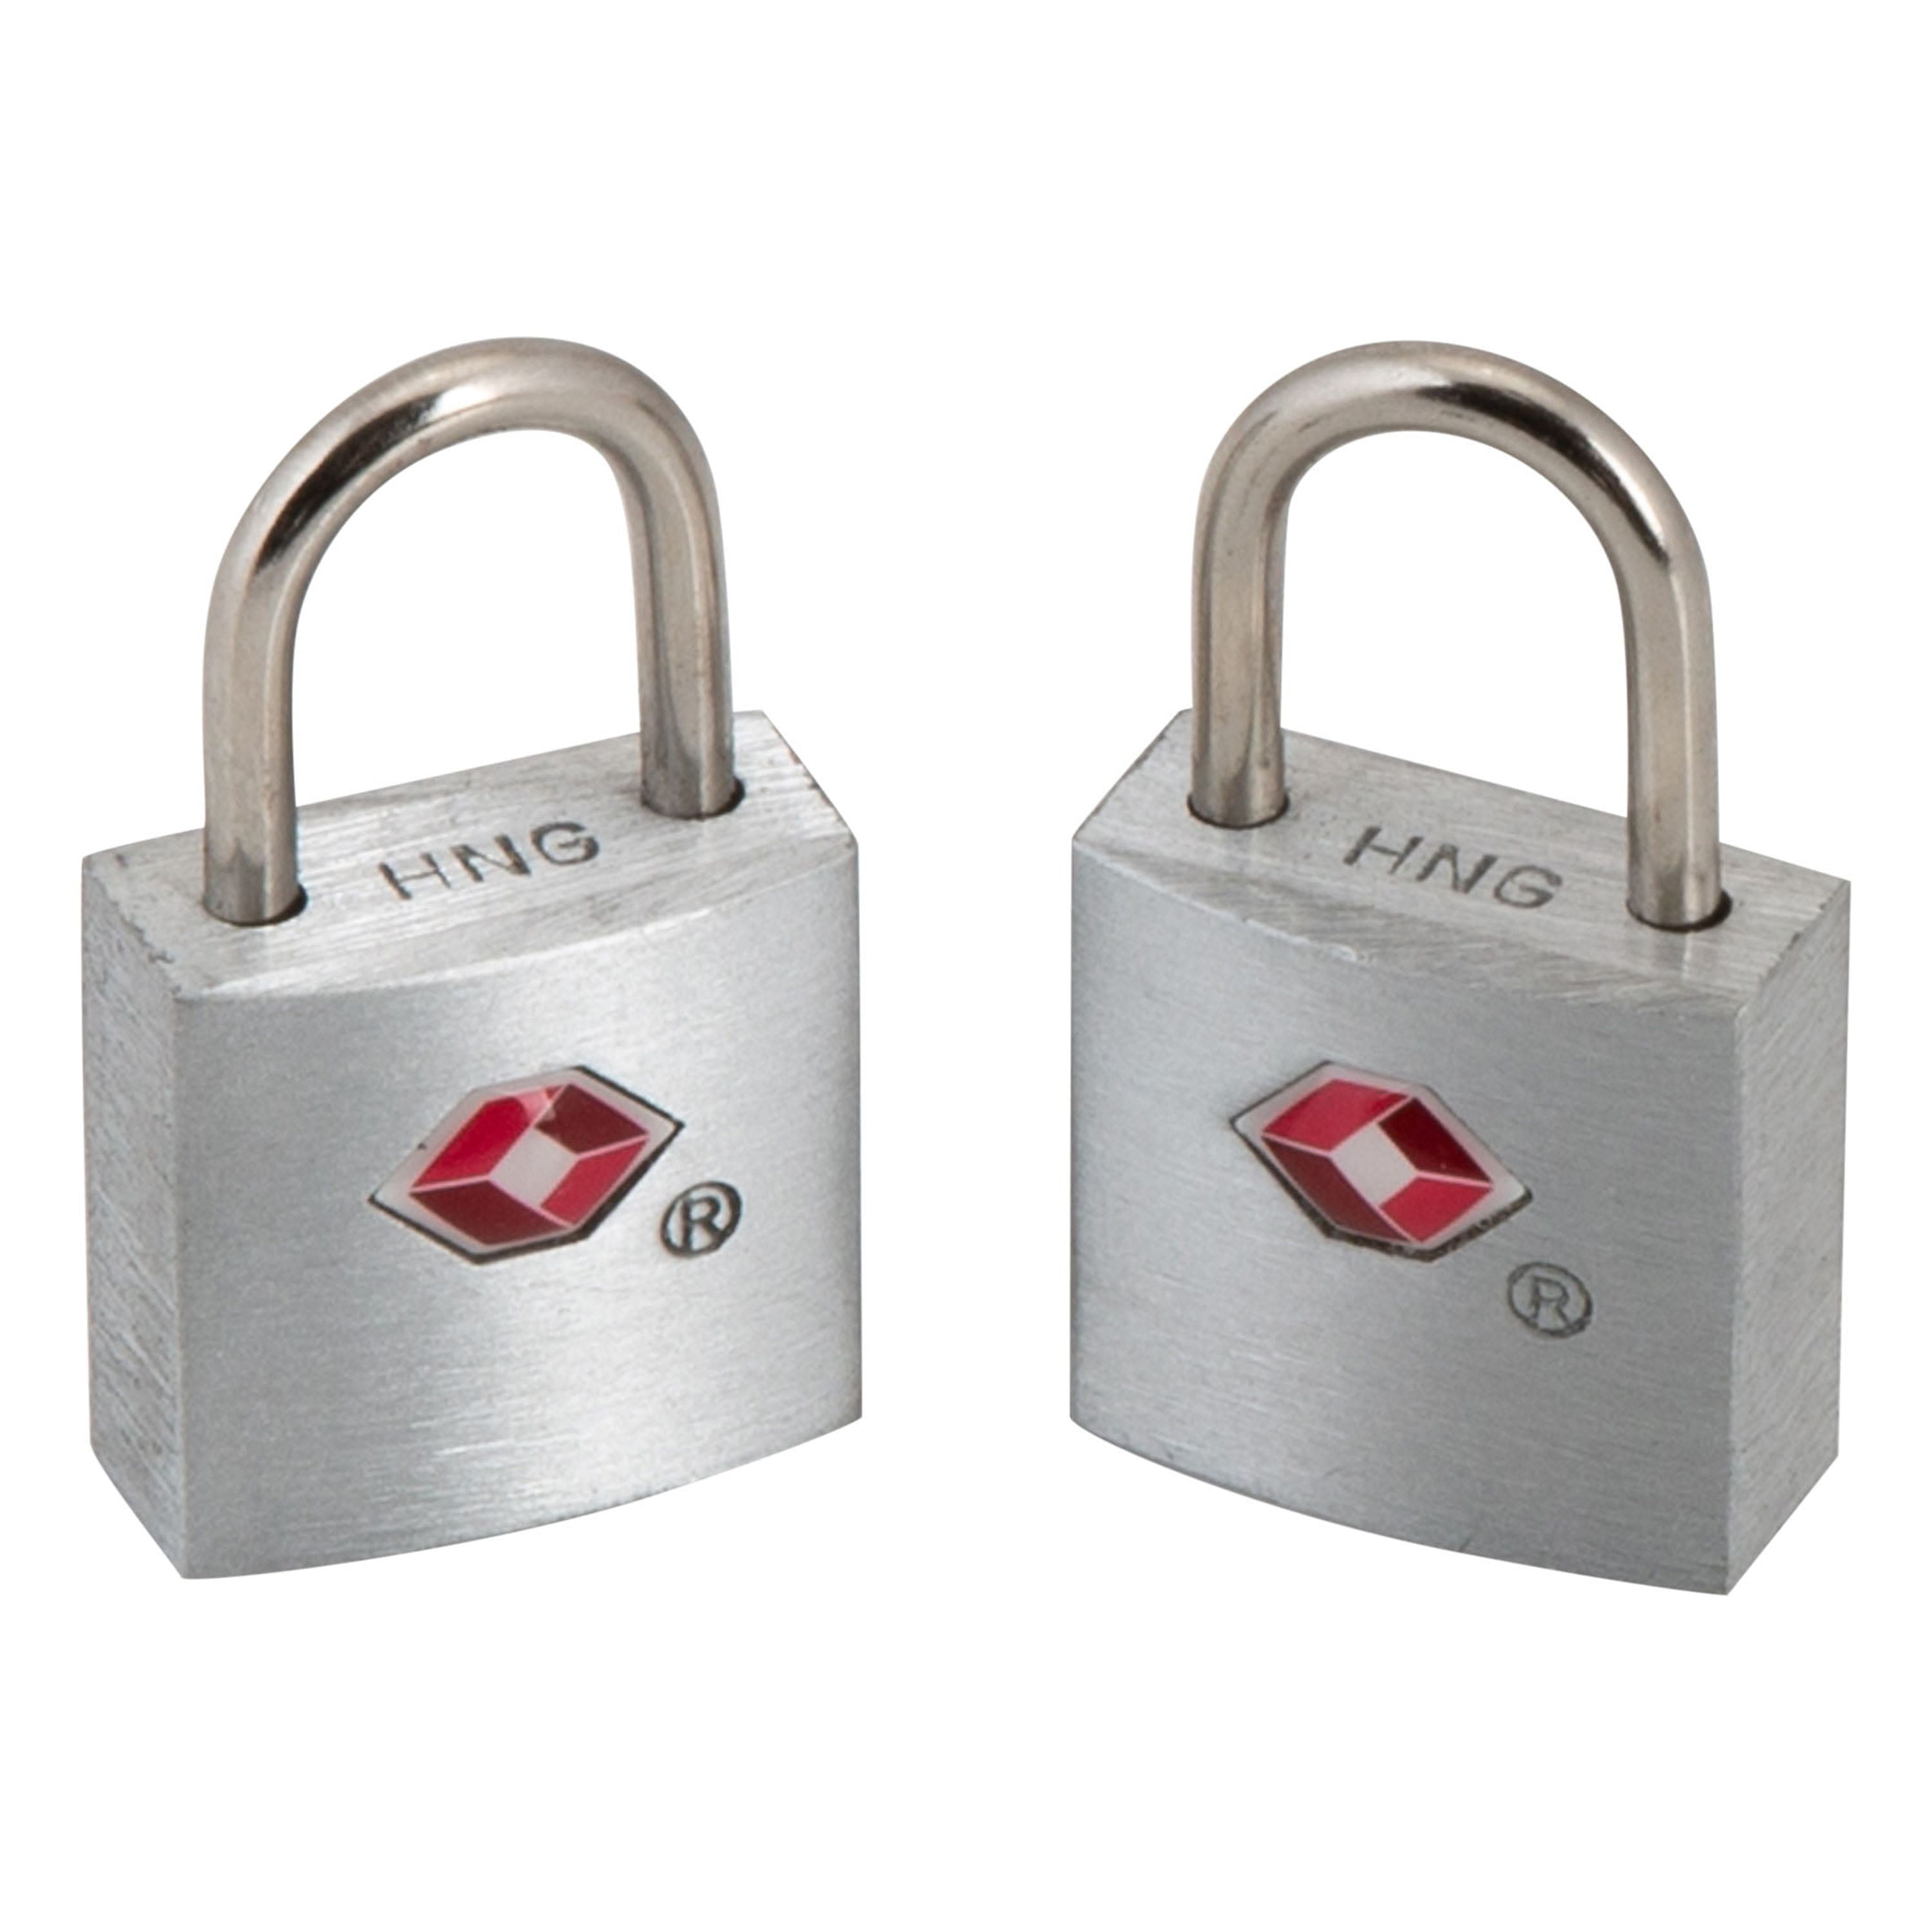 G- Force TSA Approved 2 Pack Luggage Locks - Silver